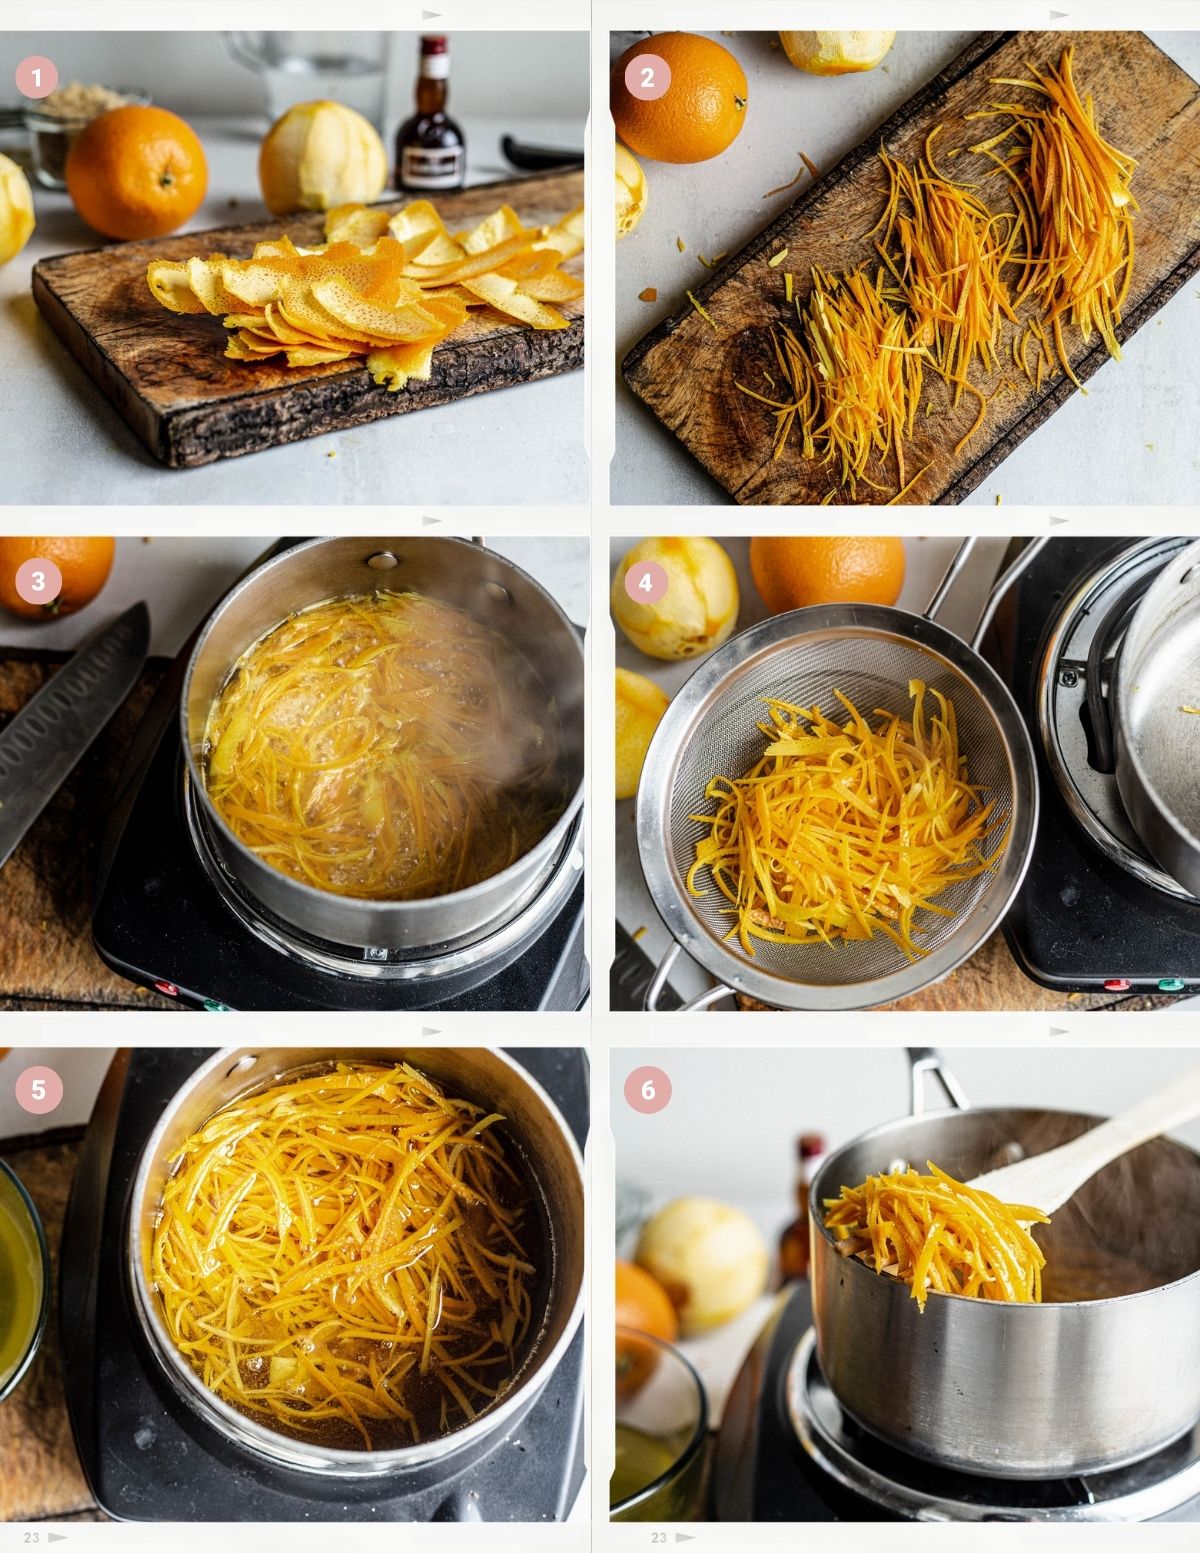 Montage showing step by step process of making the candied orange zest